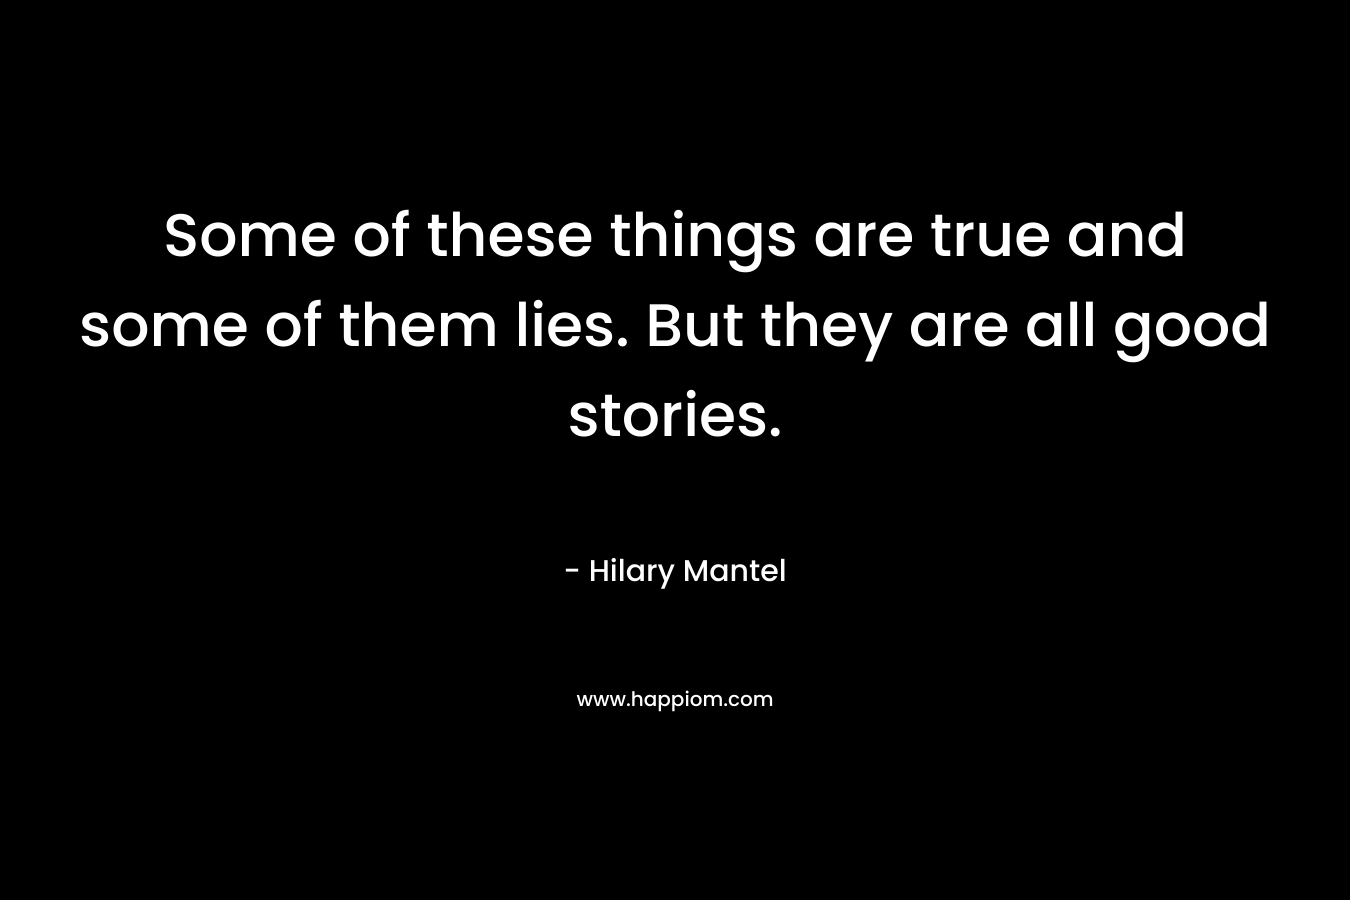 Some of these things are true and some of them lies. But they are all good stories.